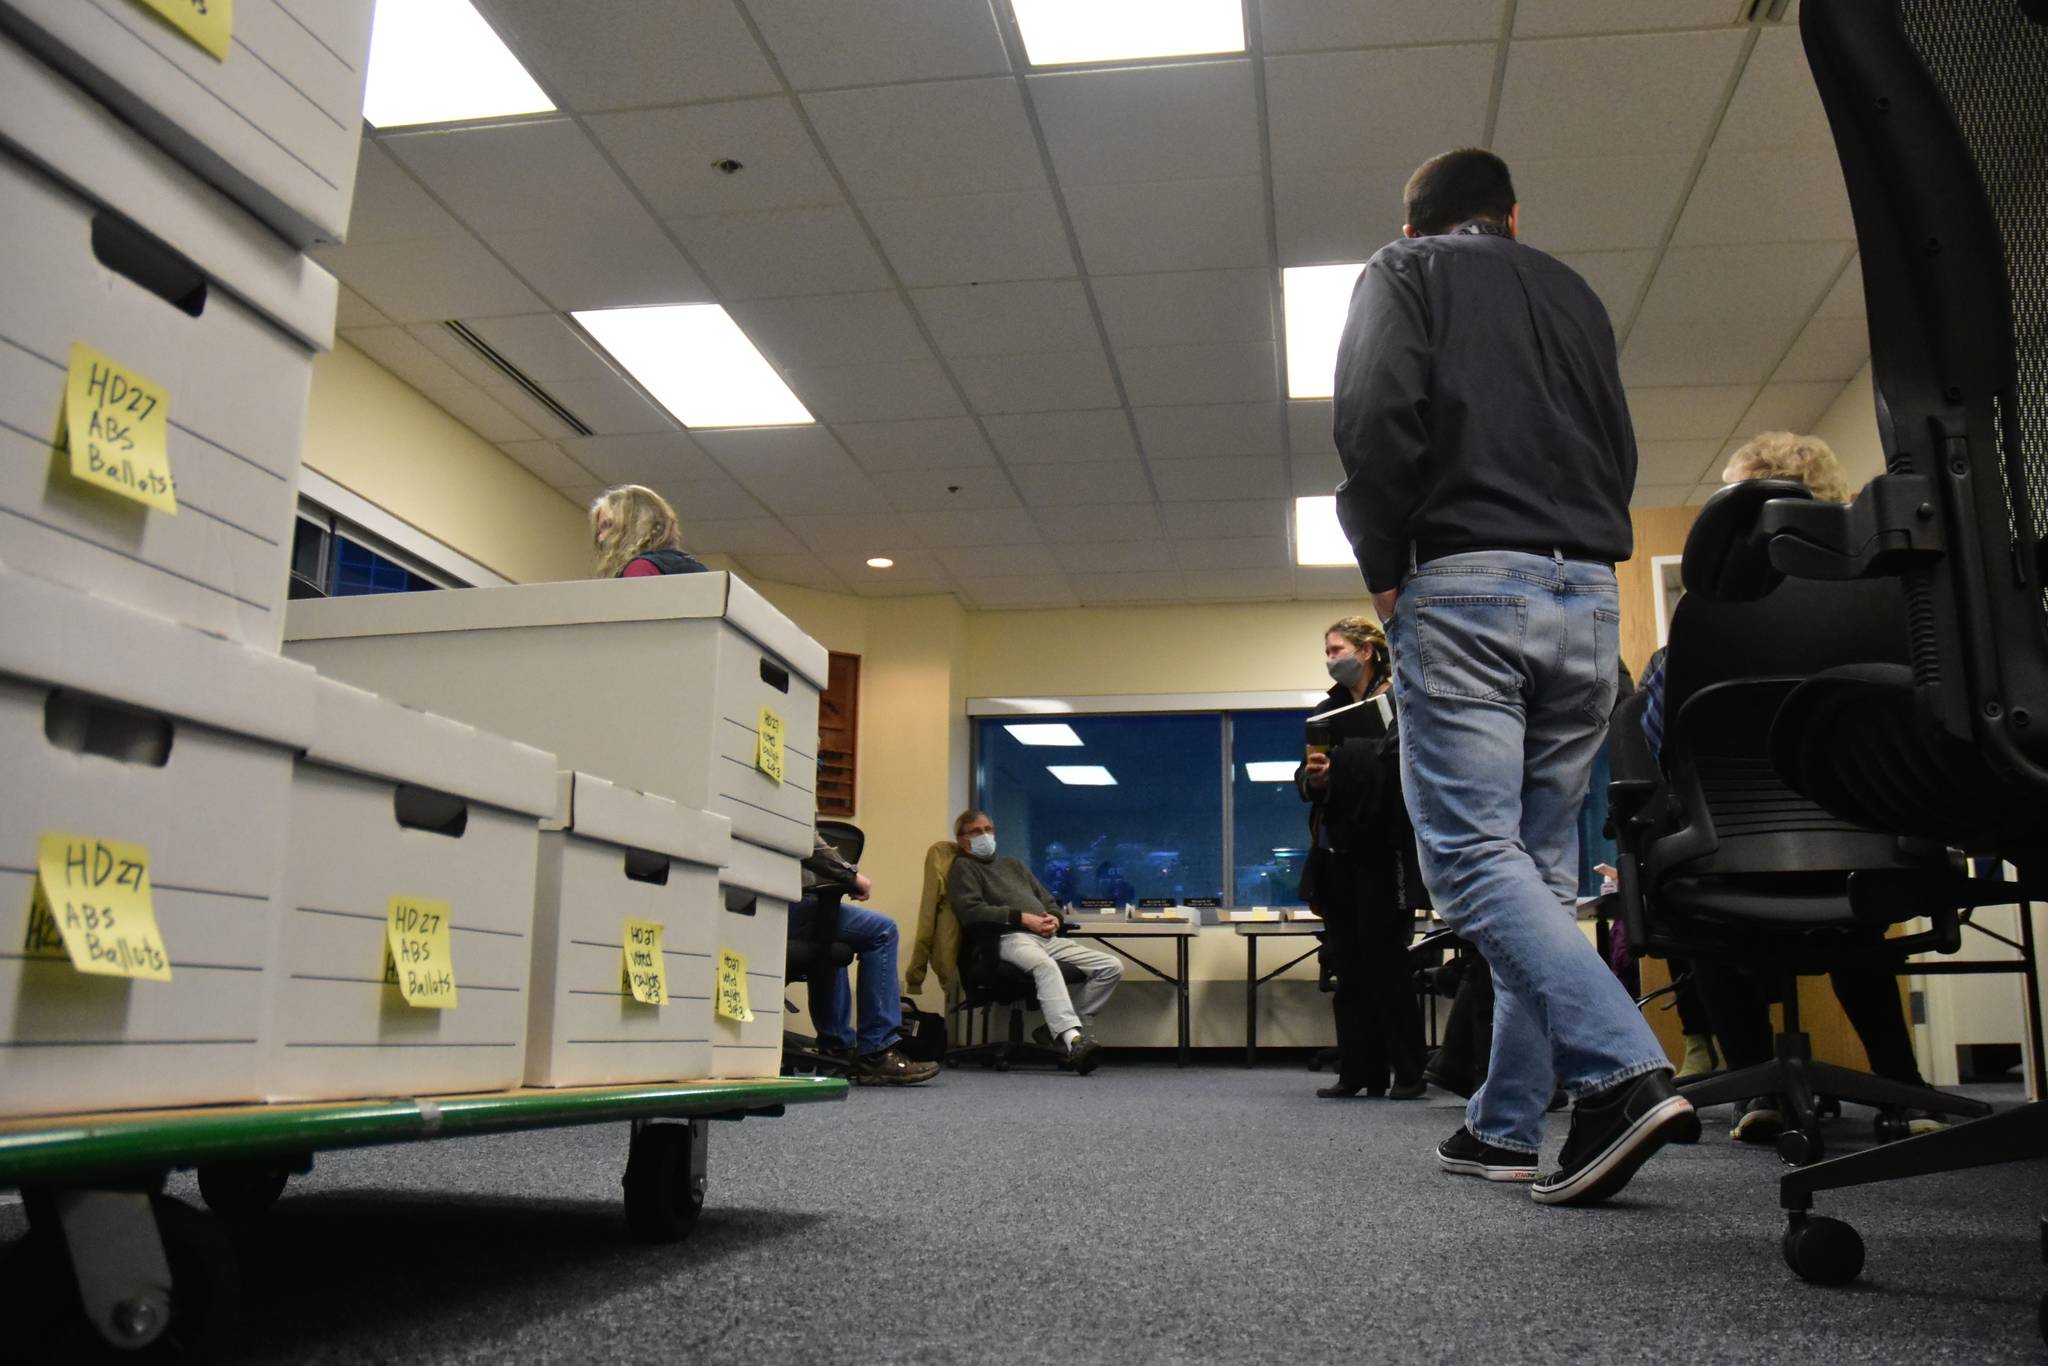 Divisions of Elections staff and members of the State Review Board get ready to recount ballots from Anchorage’s House District 27 at the DOE director’s office in Juneau on Friday, Dec. 4, 2020. (Peter Segall / Juneau Empire)